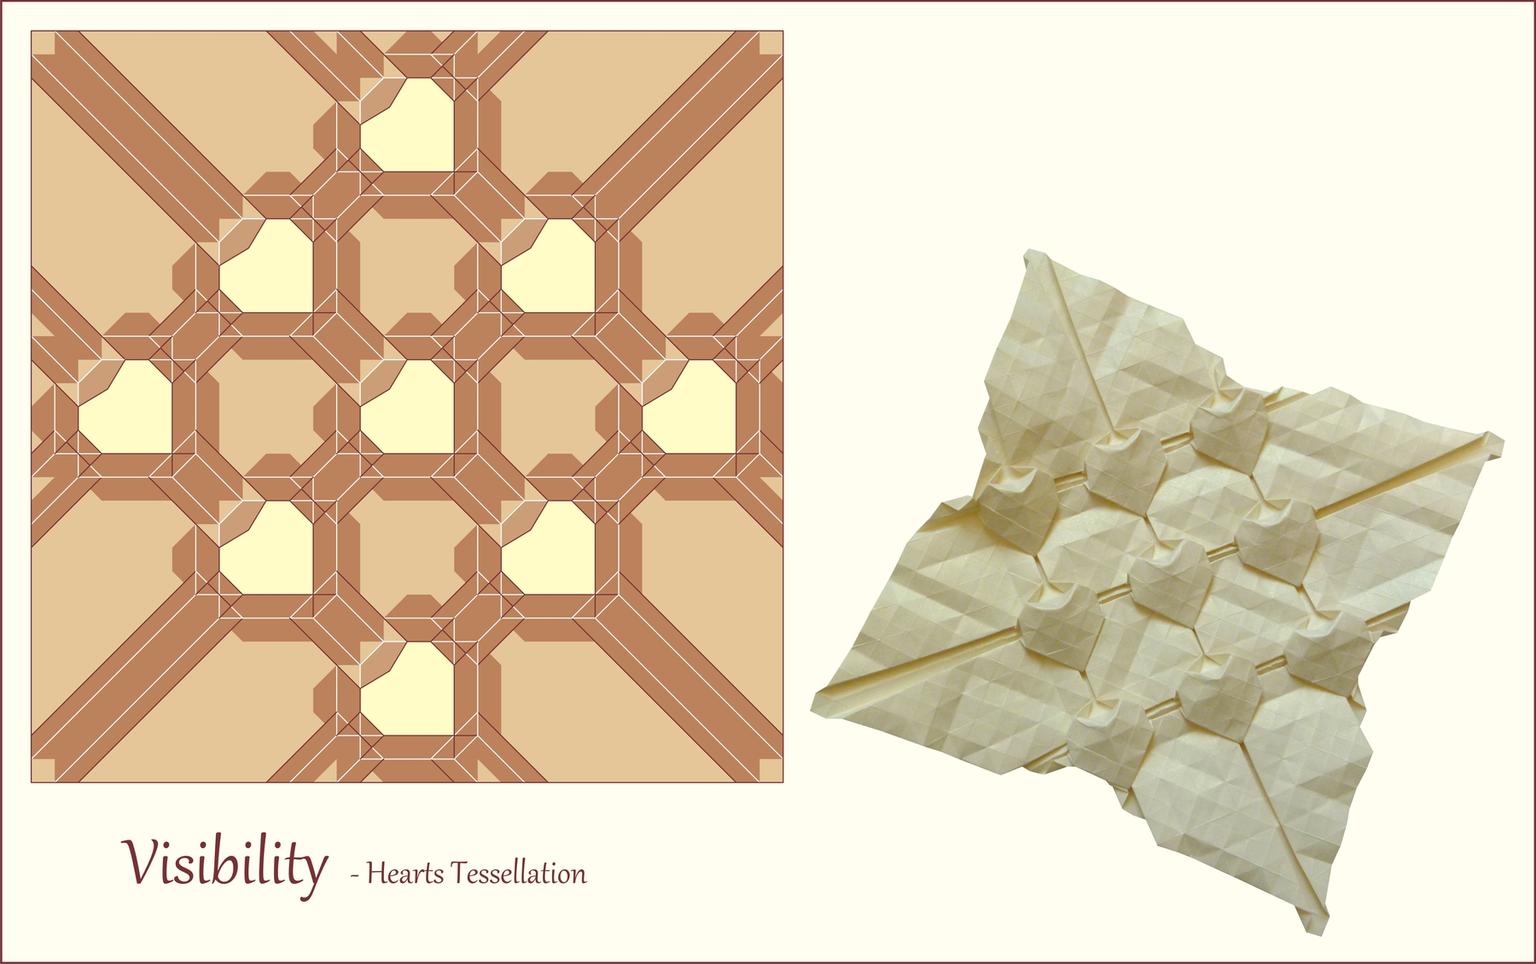 Image for entry 'Visibility - Hearts Tessellation'